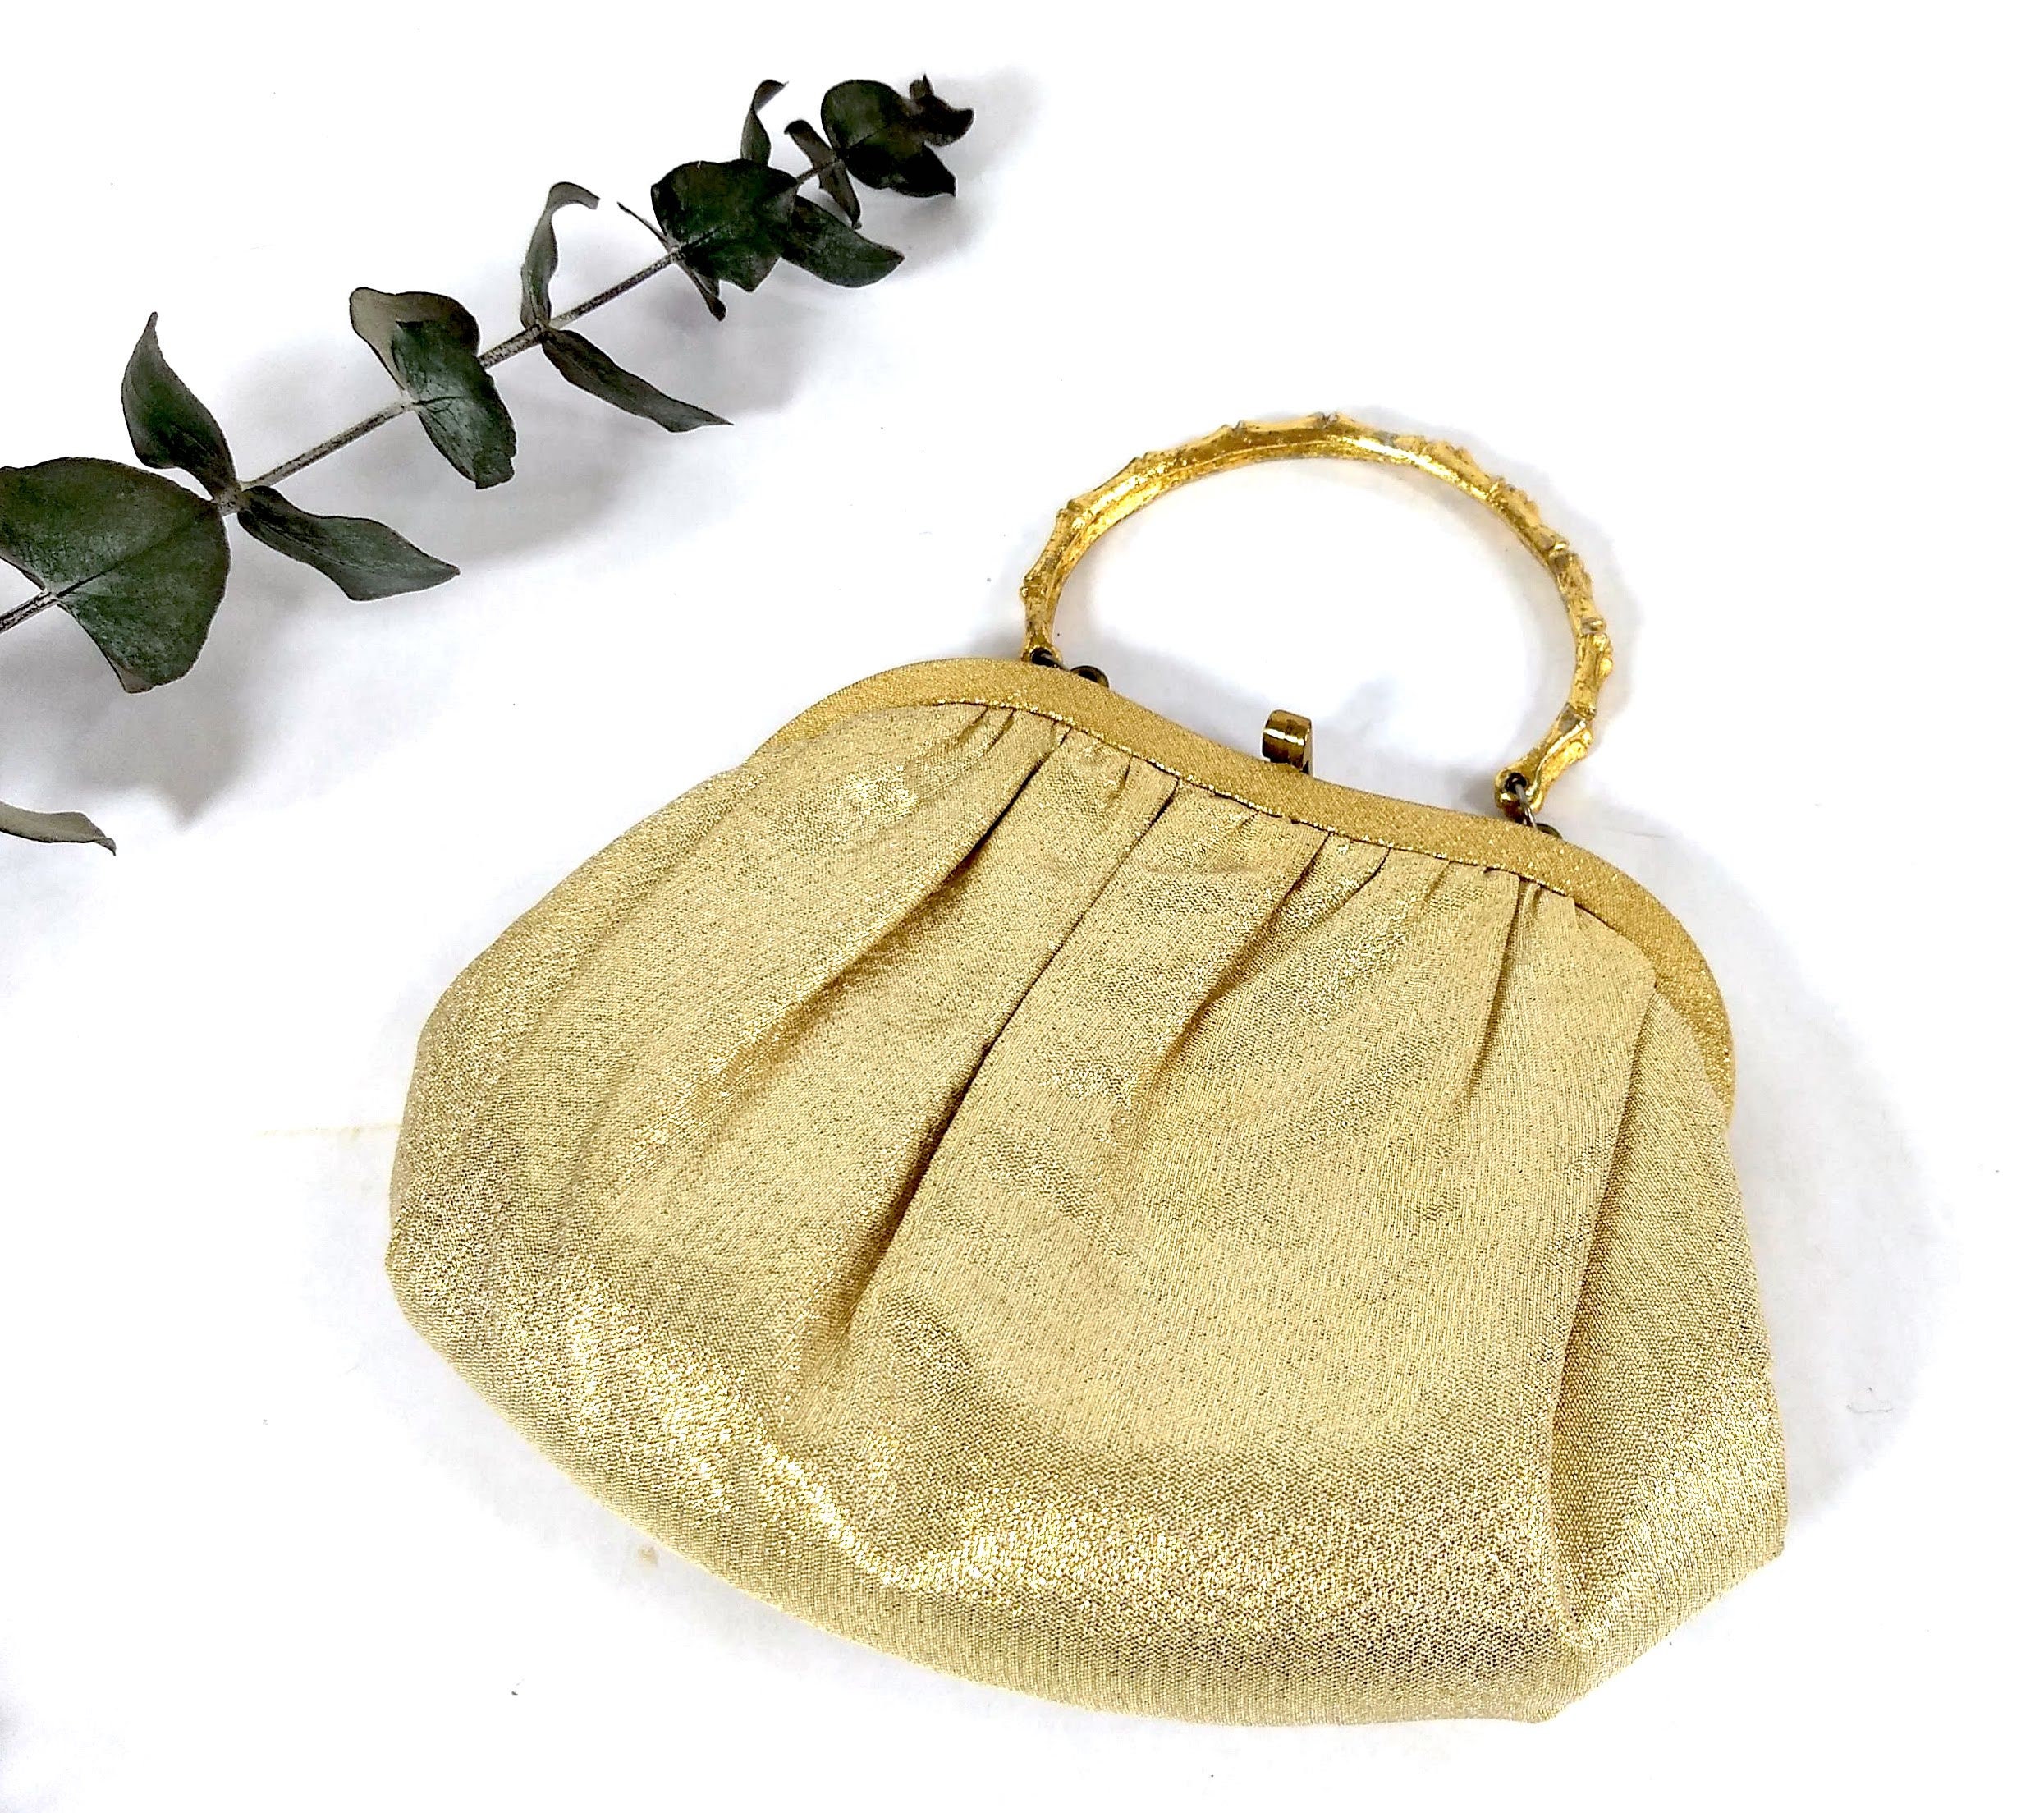 vintage glittery gold clutch or evening bag $45 - bags and purses - bright  lights big pretty